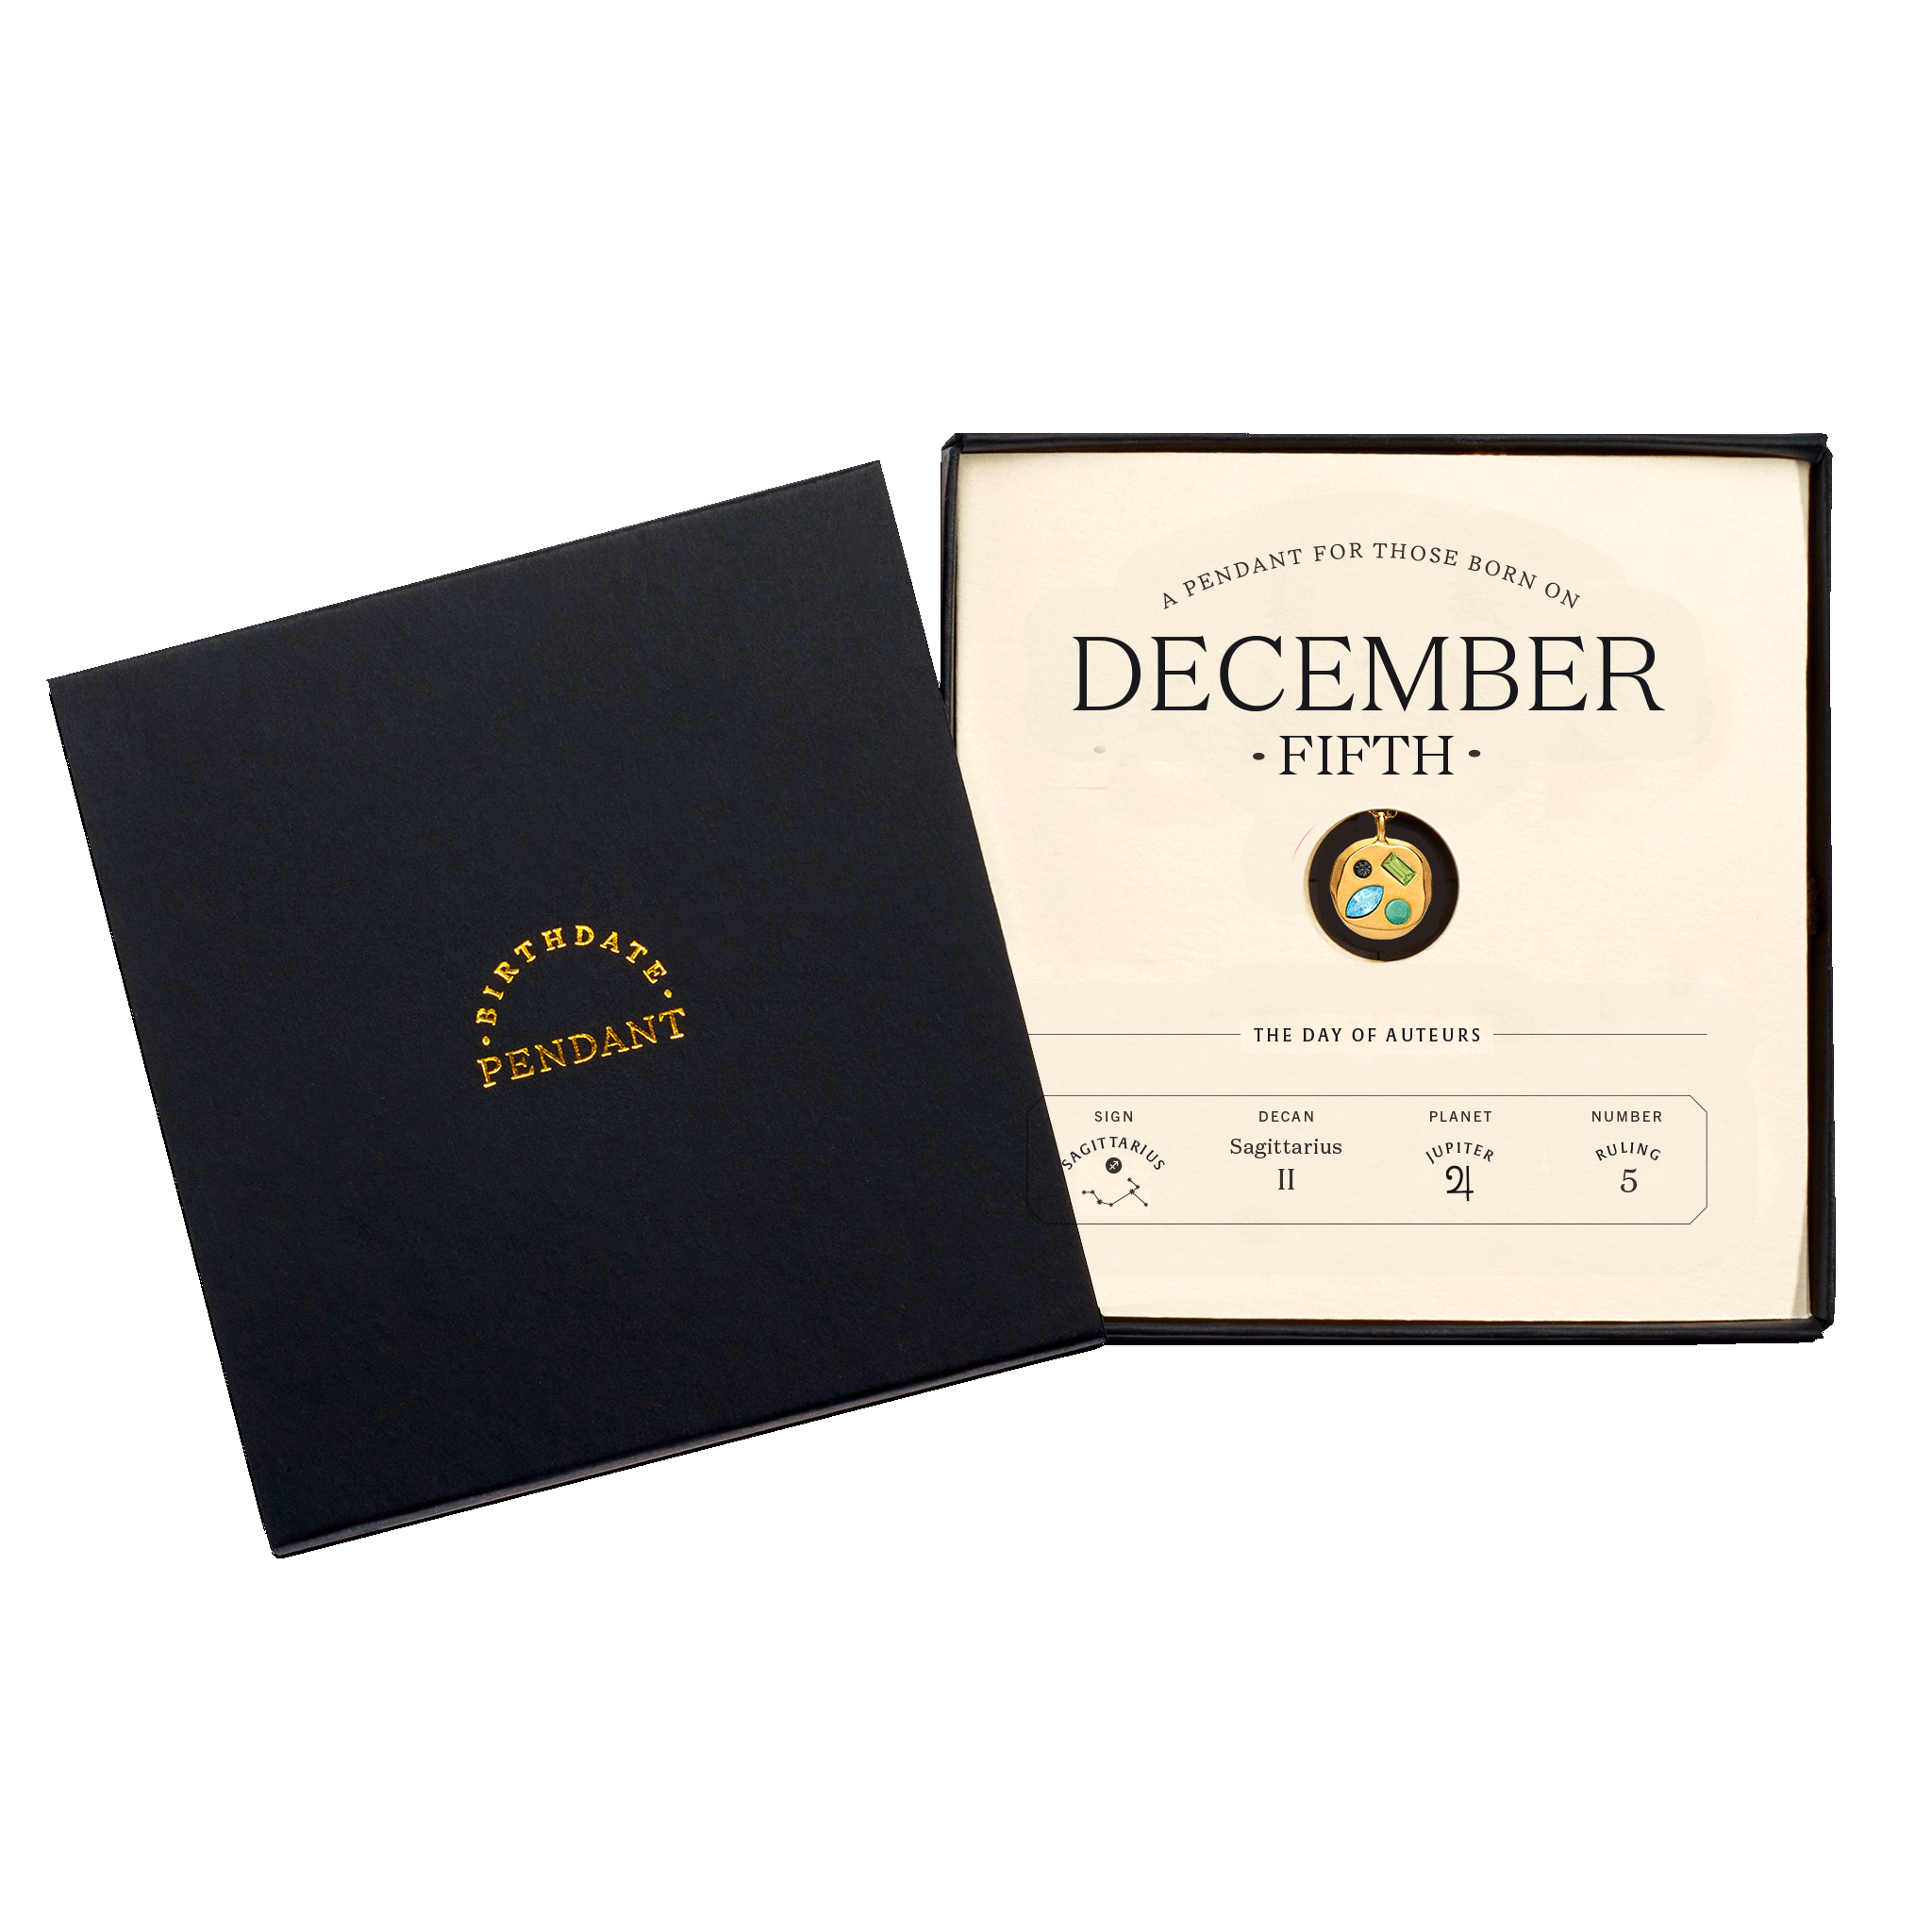 The December Fifth Pendant inside its box